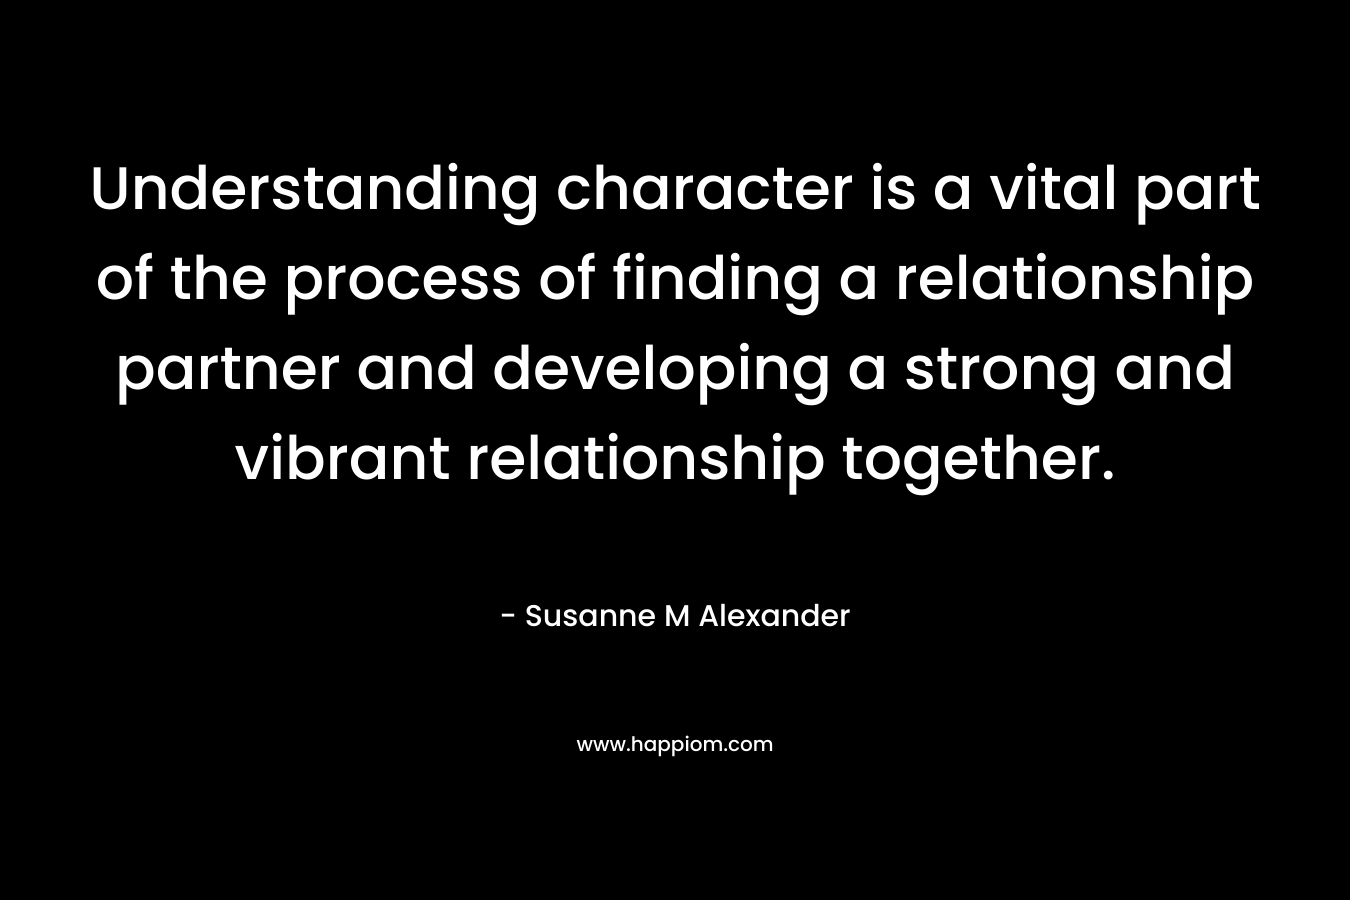 Understanding character is a vital part of the process of finding a relationship partner and developing a strong and vibrant relationship together. – Susanne M Alexander